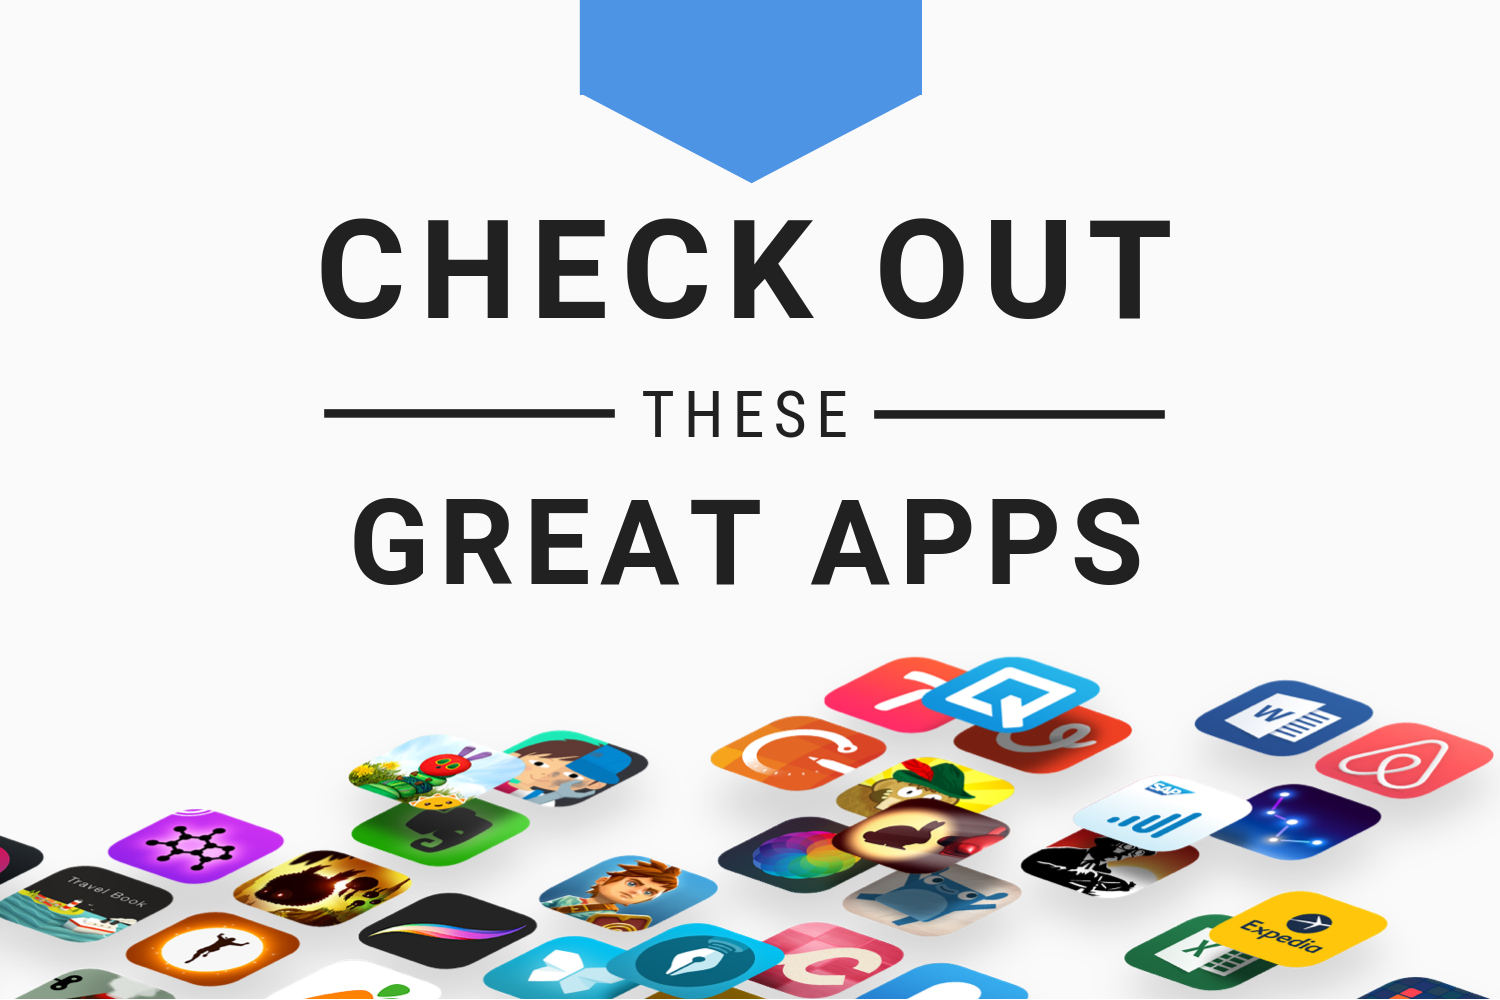 DPTH, East of the Rockies, Illume Health, and other apps to check out this weekend